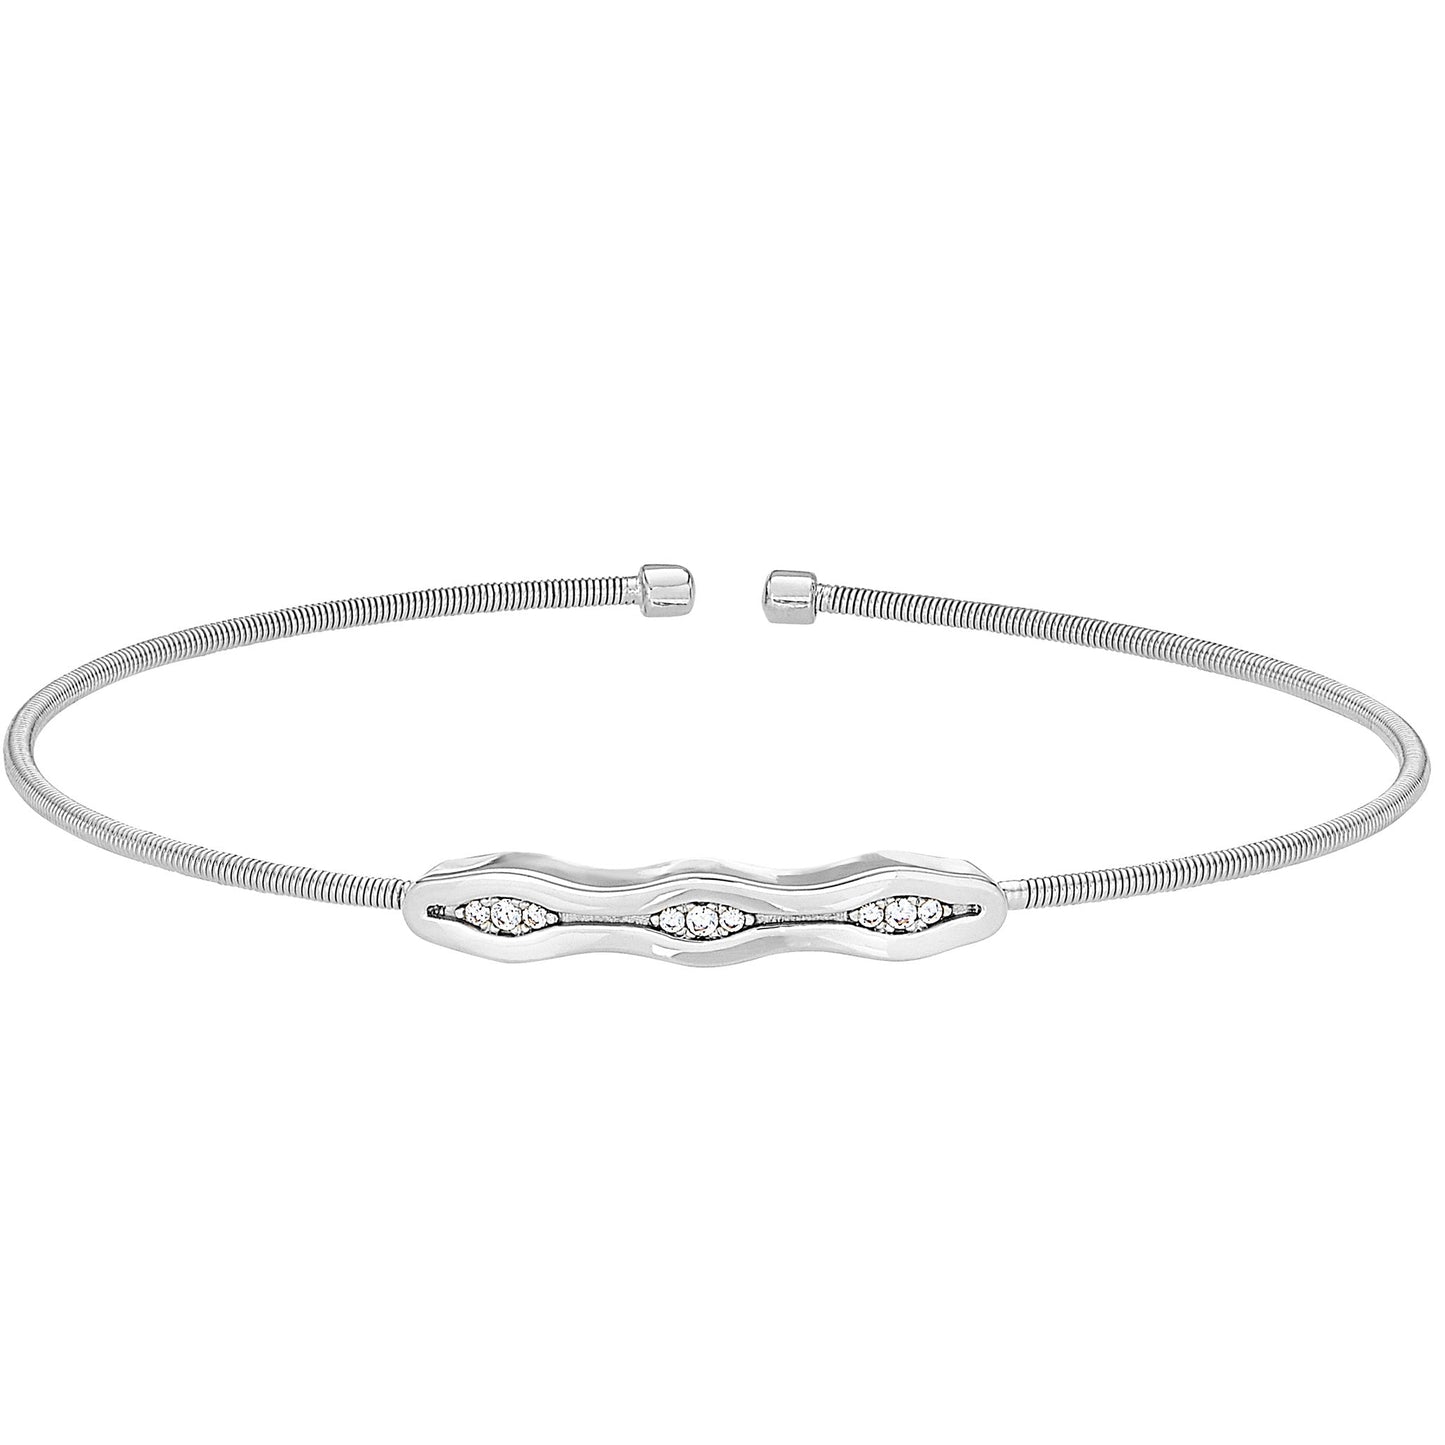 A geometric pattern flexible cable bracelet with simulated diamonds displayed on a neutral white background.